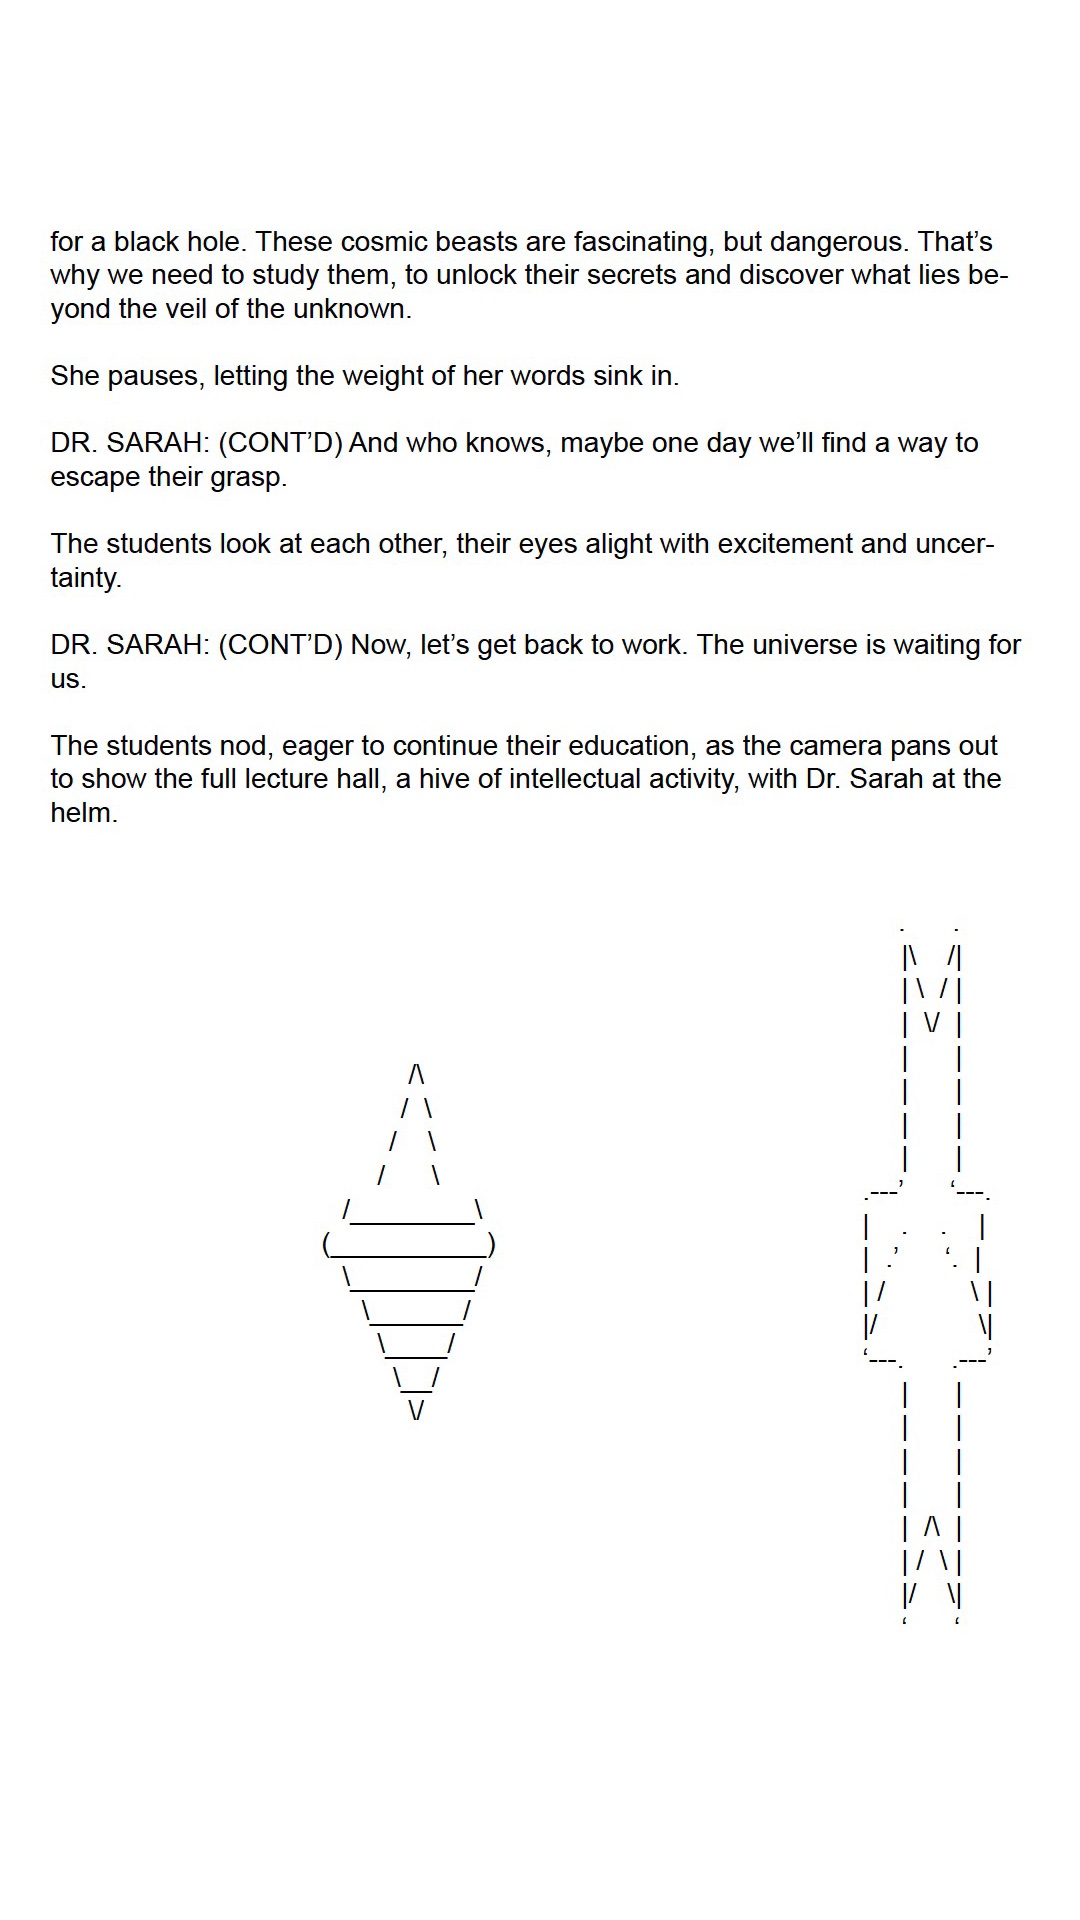 An excerpt of a typed drama script. Towards the bottom of the page are two abstract ASCII illustrations.